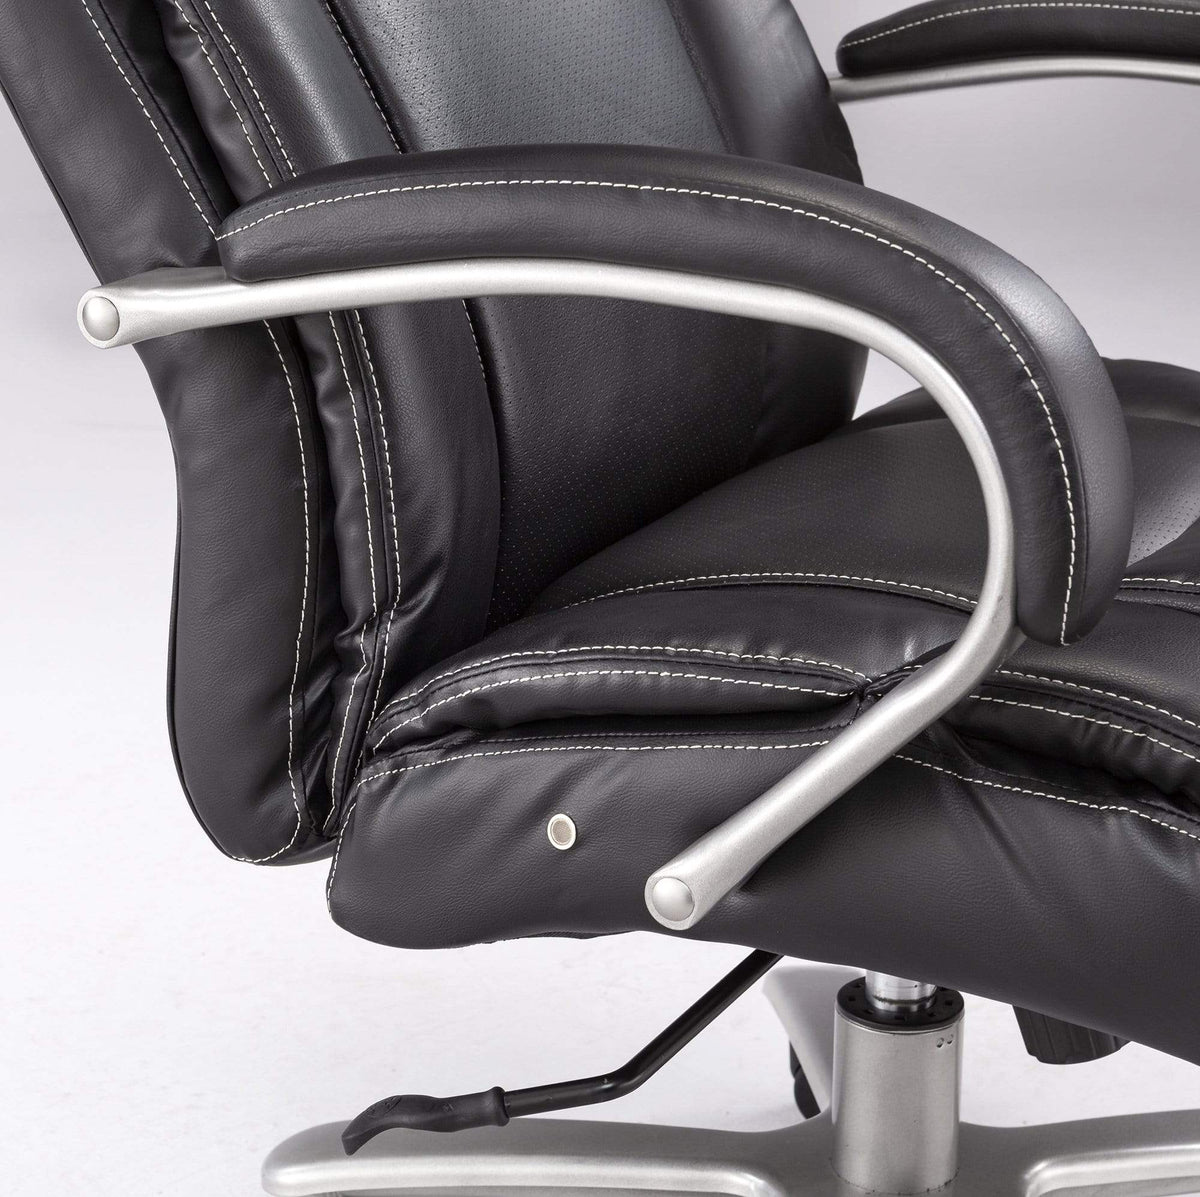 http://www.officechairsunlimited.com/cdn/shop/products/safco-lineage-big-tall-mid-back-task-chair-350-lb-weight-capacity-3504bl-black-31940582998167_1200x1200.jpg?v=1629924279